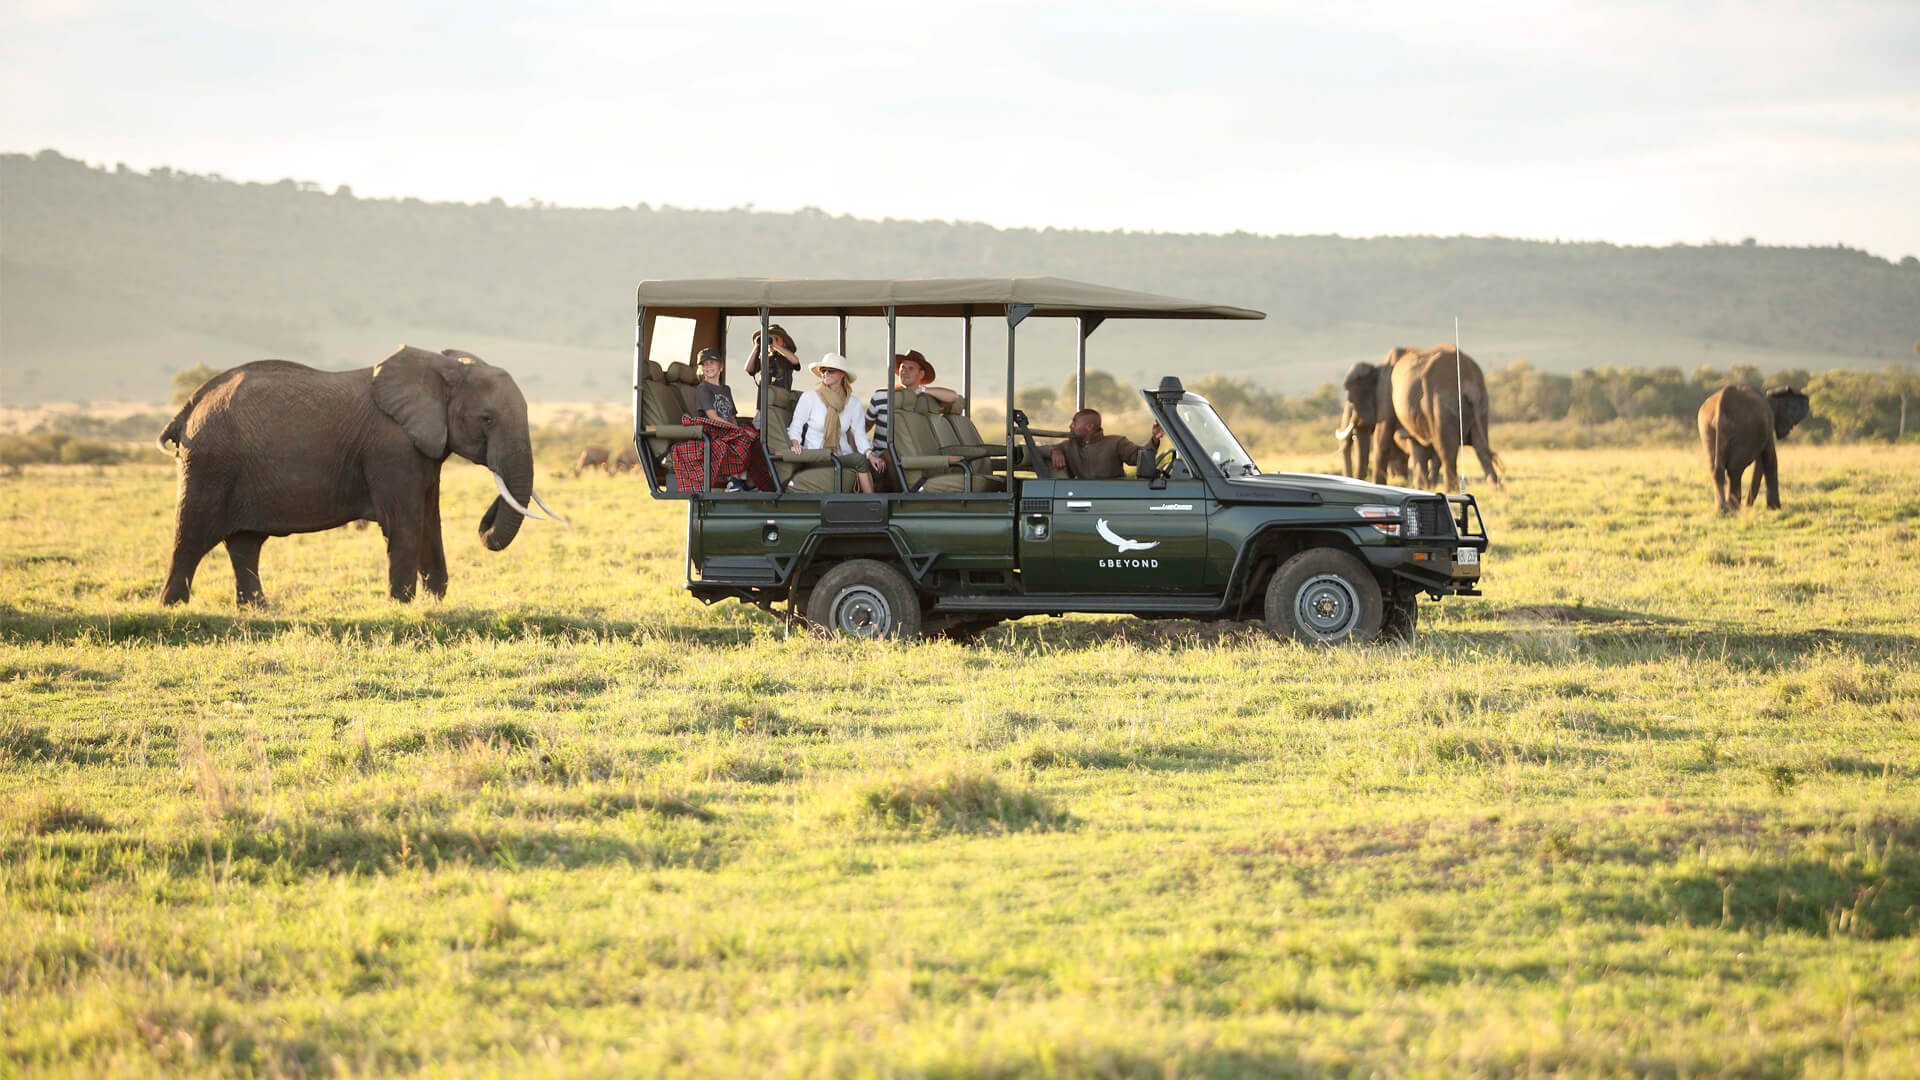 Masai Mara The Best Place For Safari | Airways Office | Airlines Office | Air Ticket Office